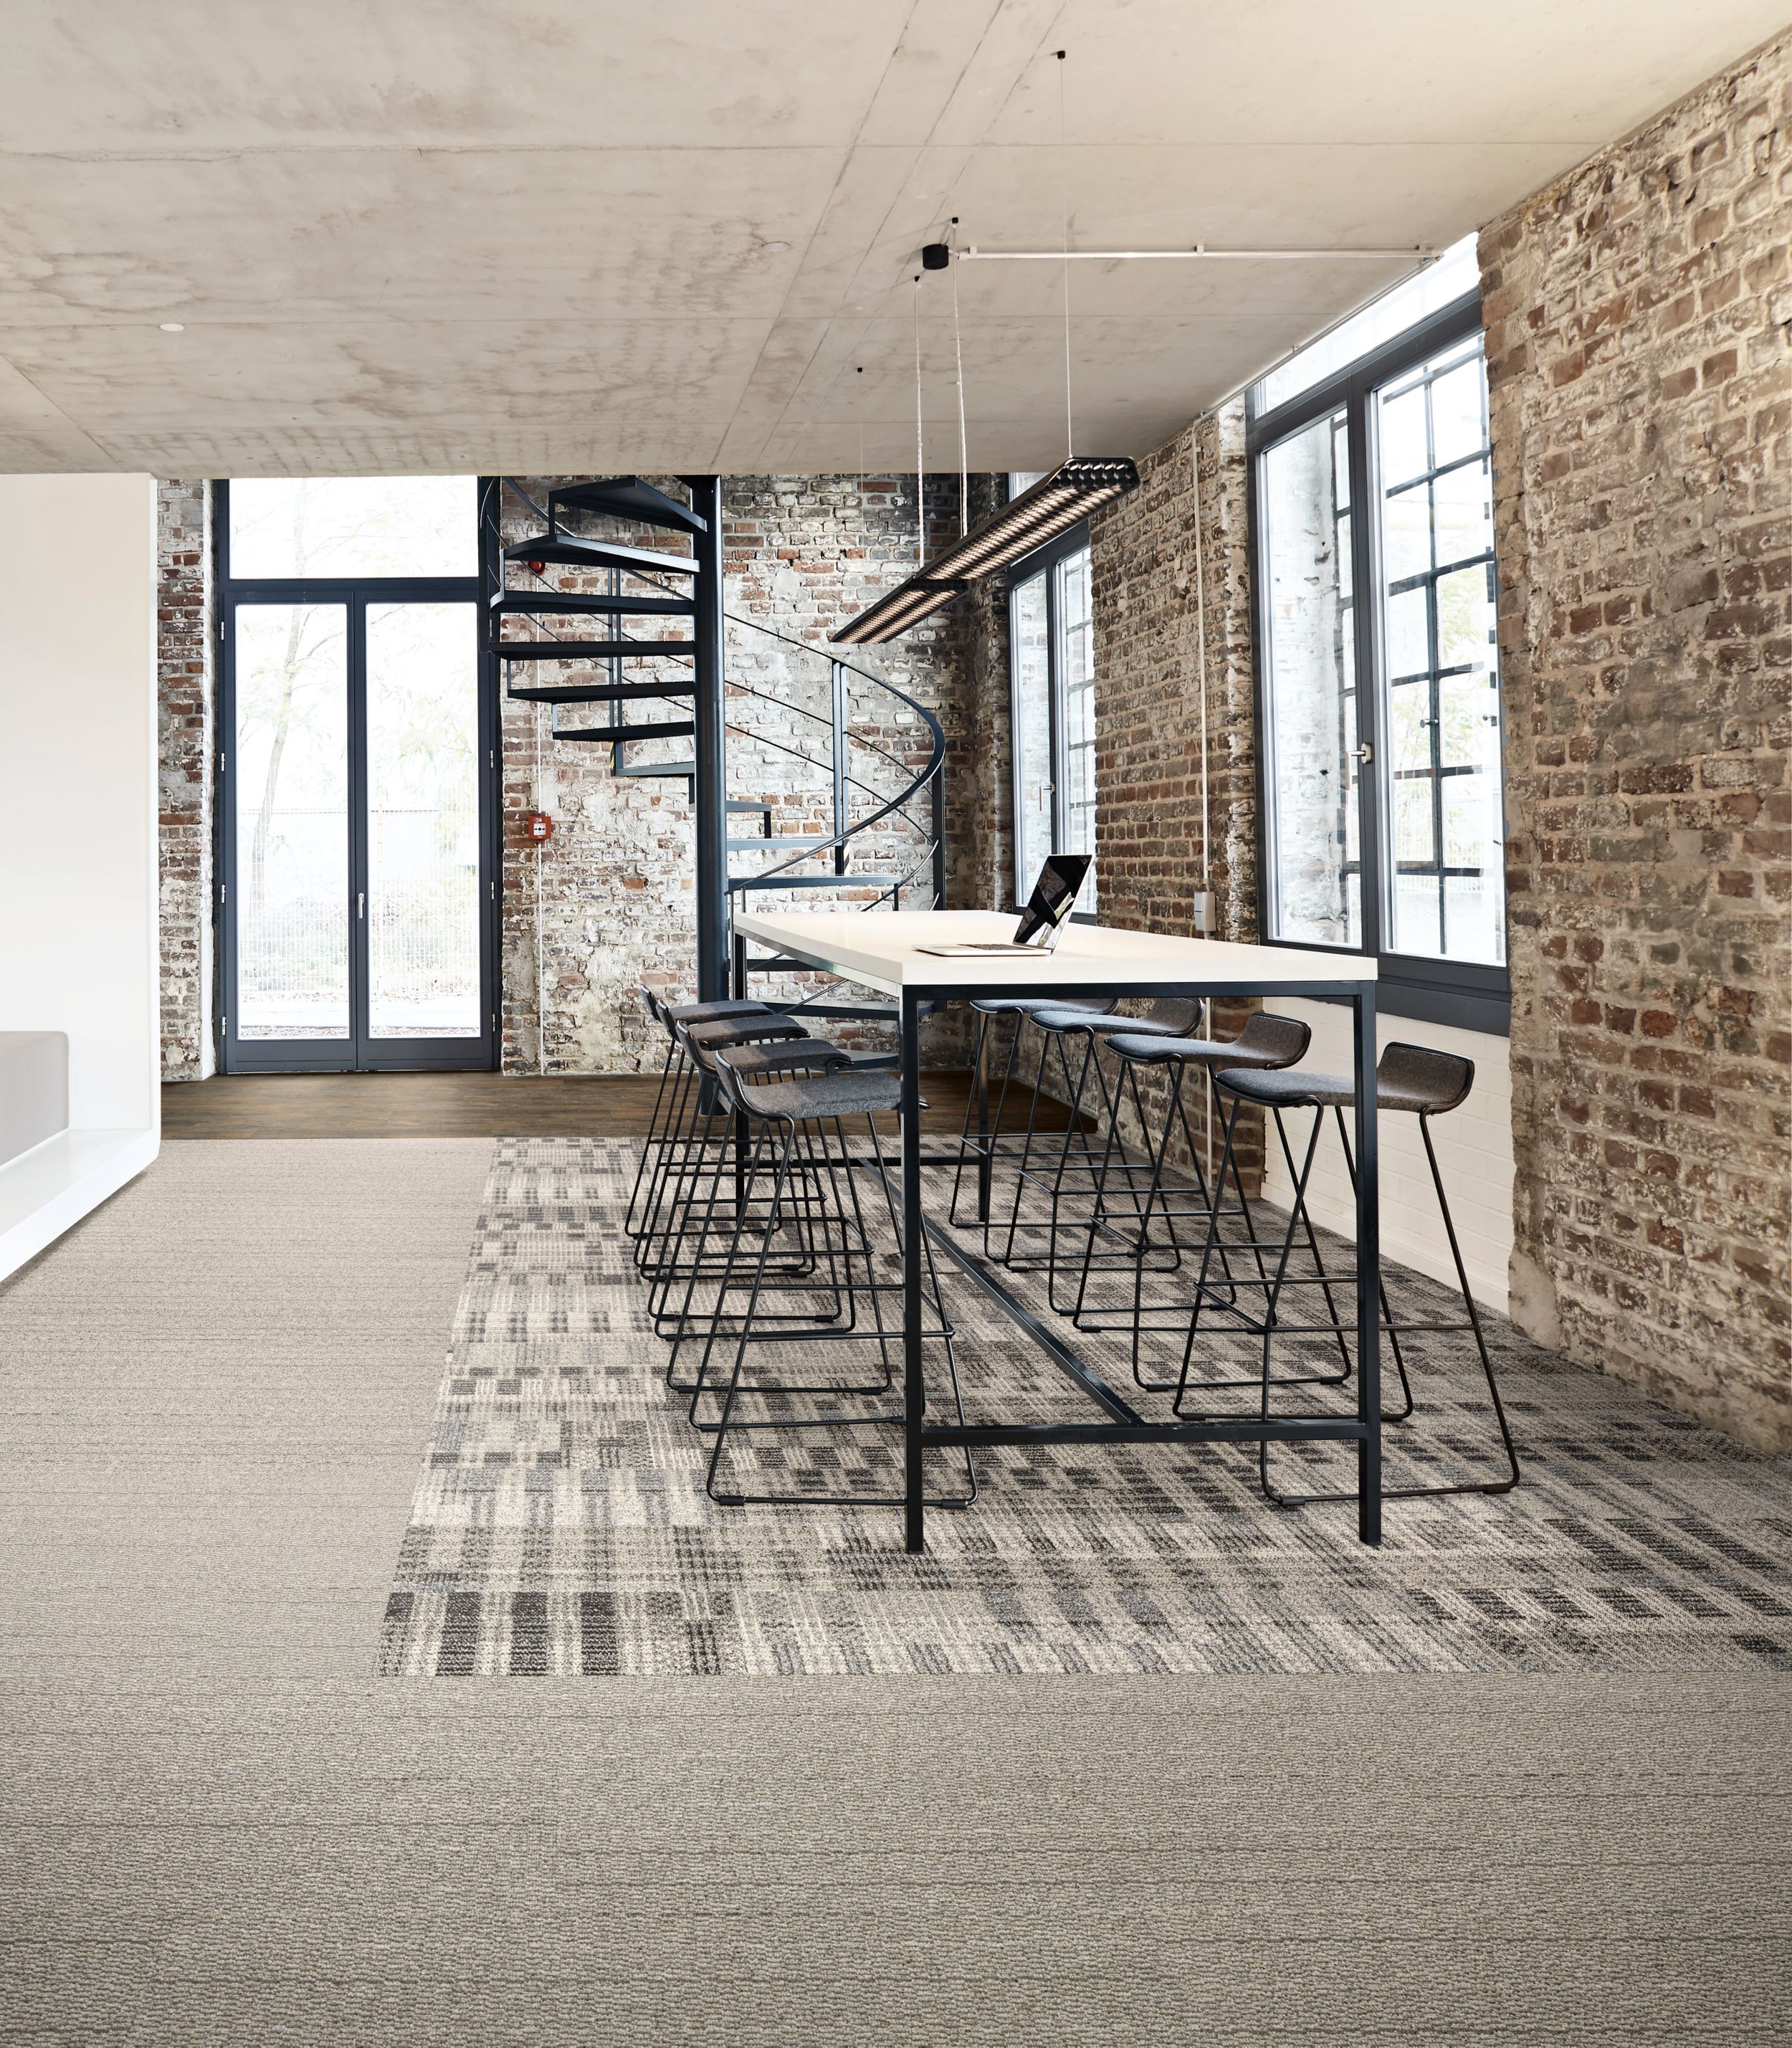 Interface Loom of Life and Tangled & Taut plank carpet tile with Textured Woodgrains LVT in seating area with brick walls and spiral staircase in background numéro d’image 7